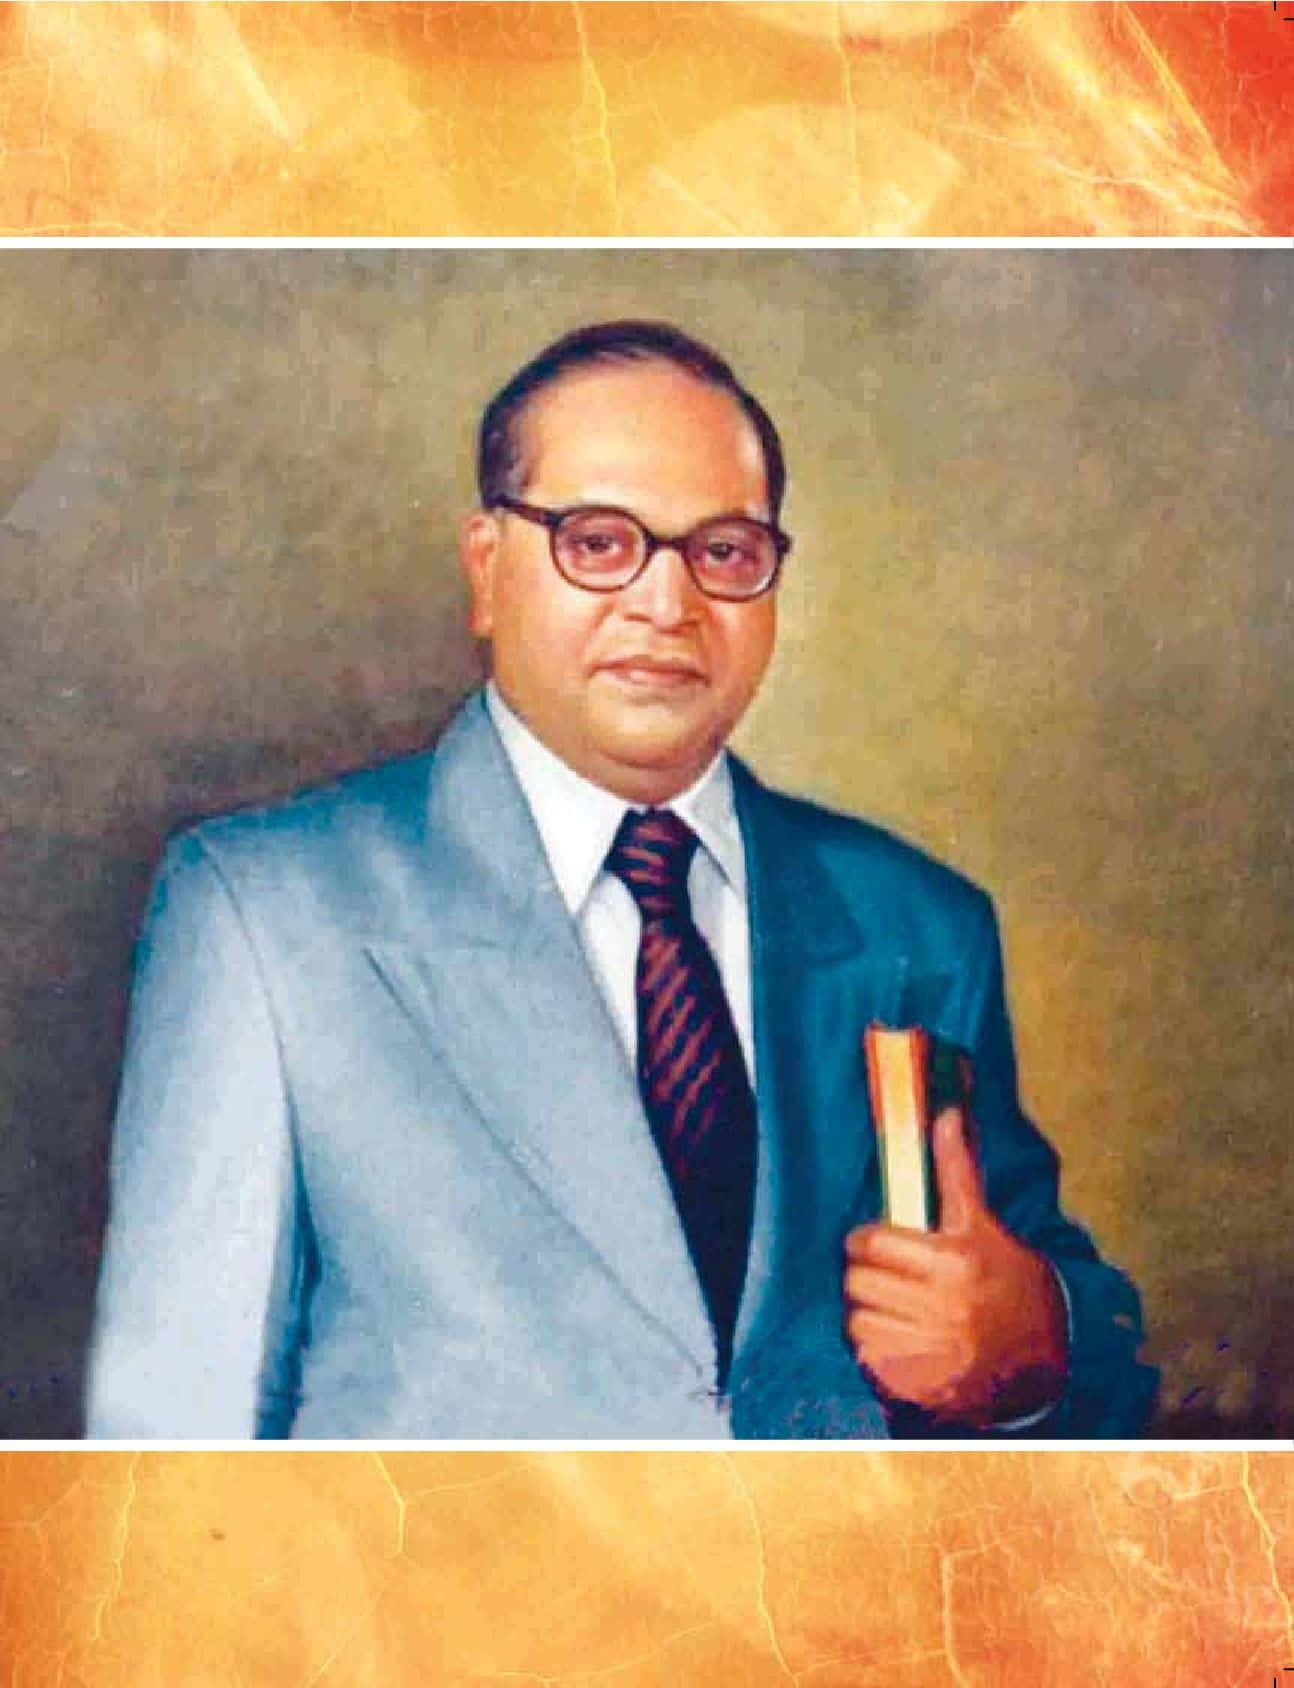 Ambedkar - Architect of the Indian Constitution